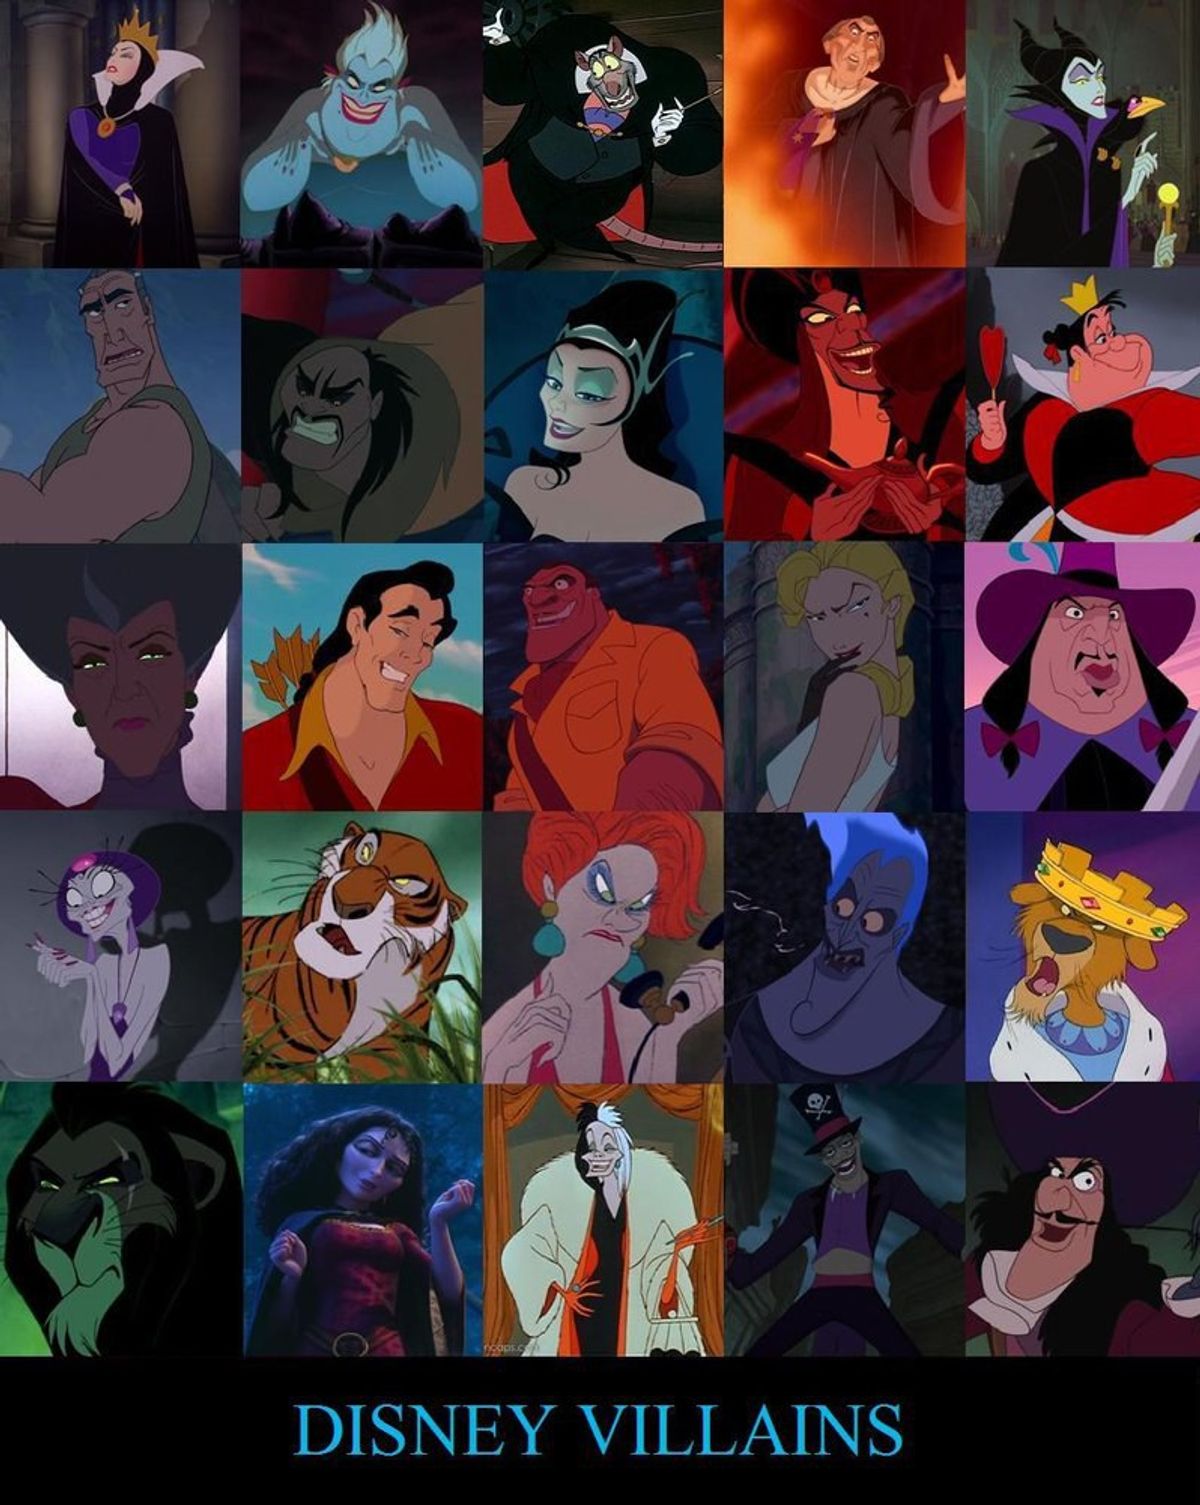 College Life As Told By Disney Villians